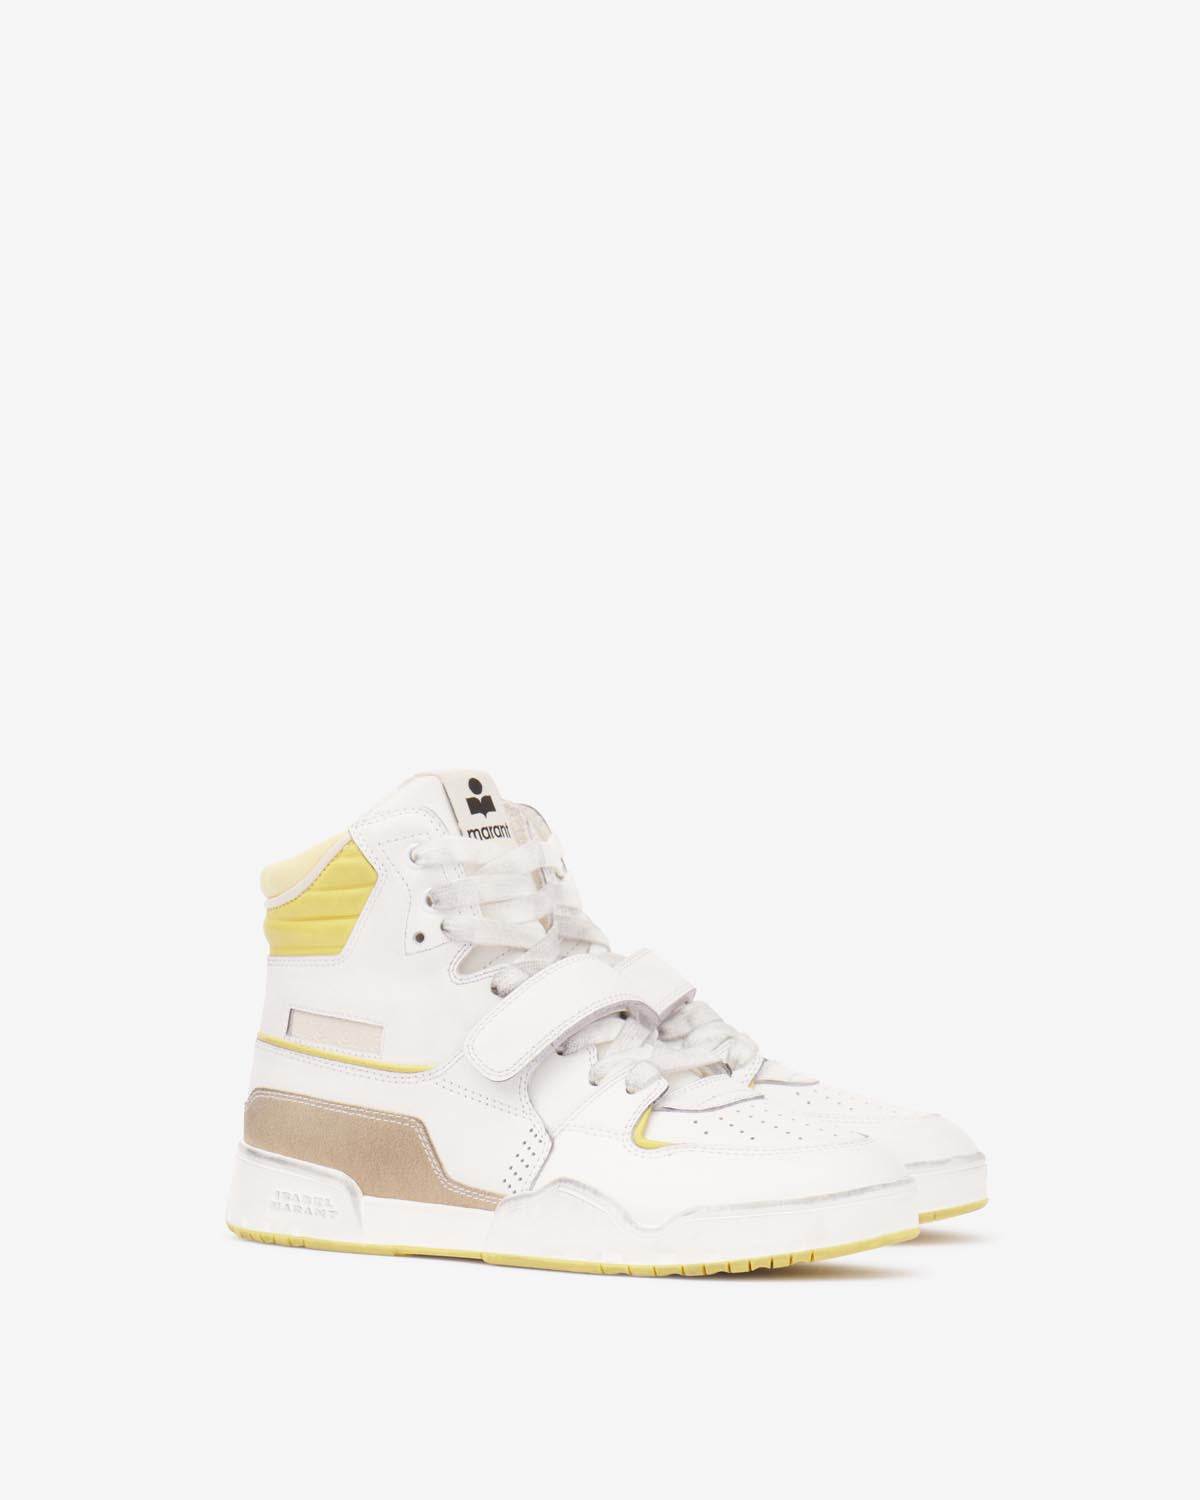 Alsee sneakers Woman Light yellow-yellow 10